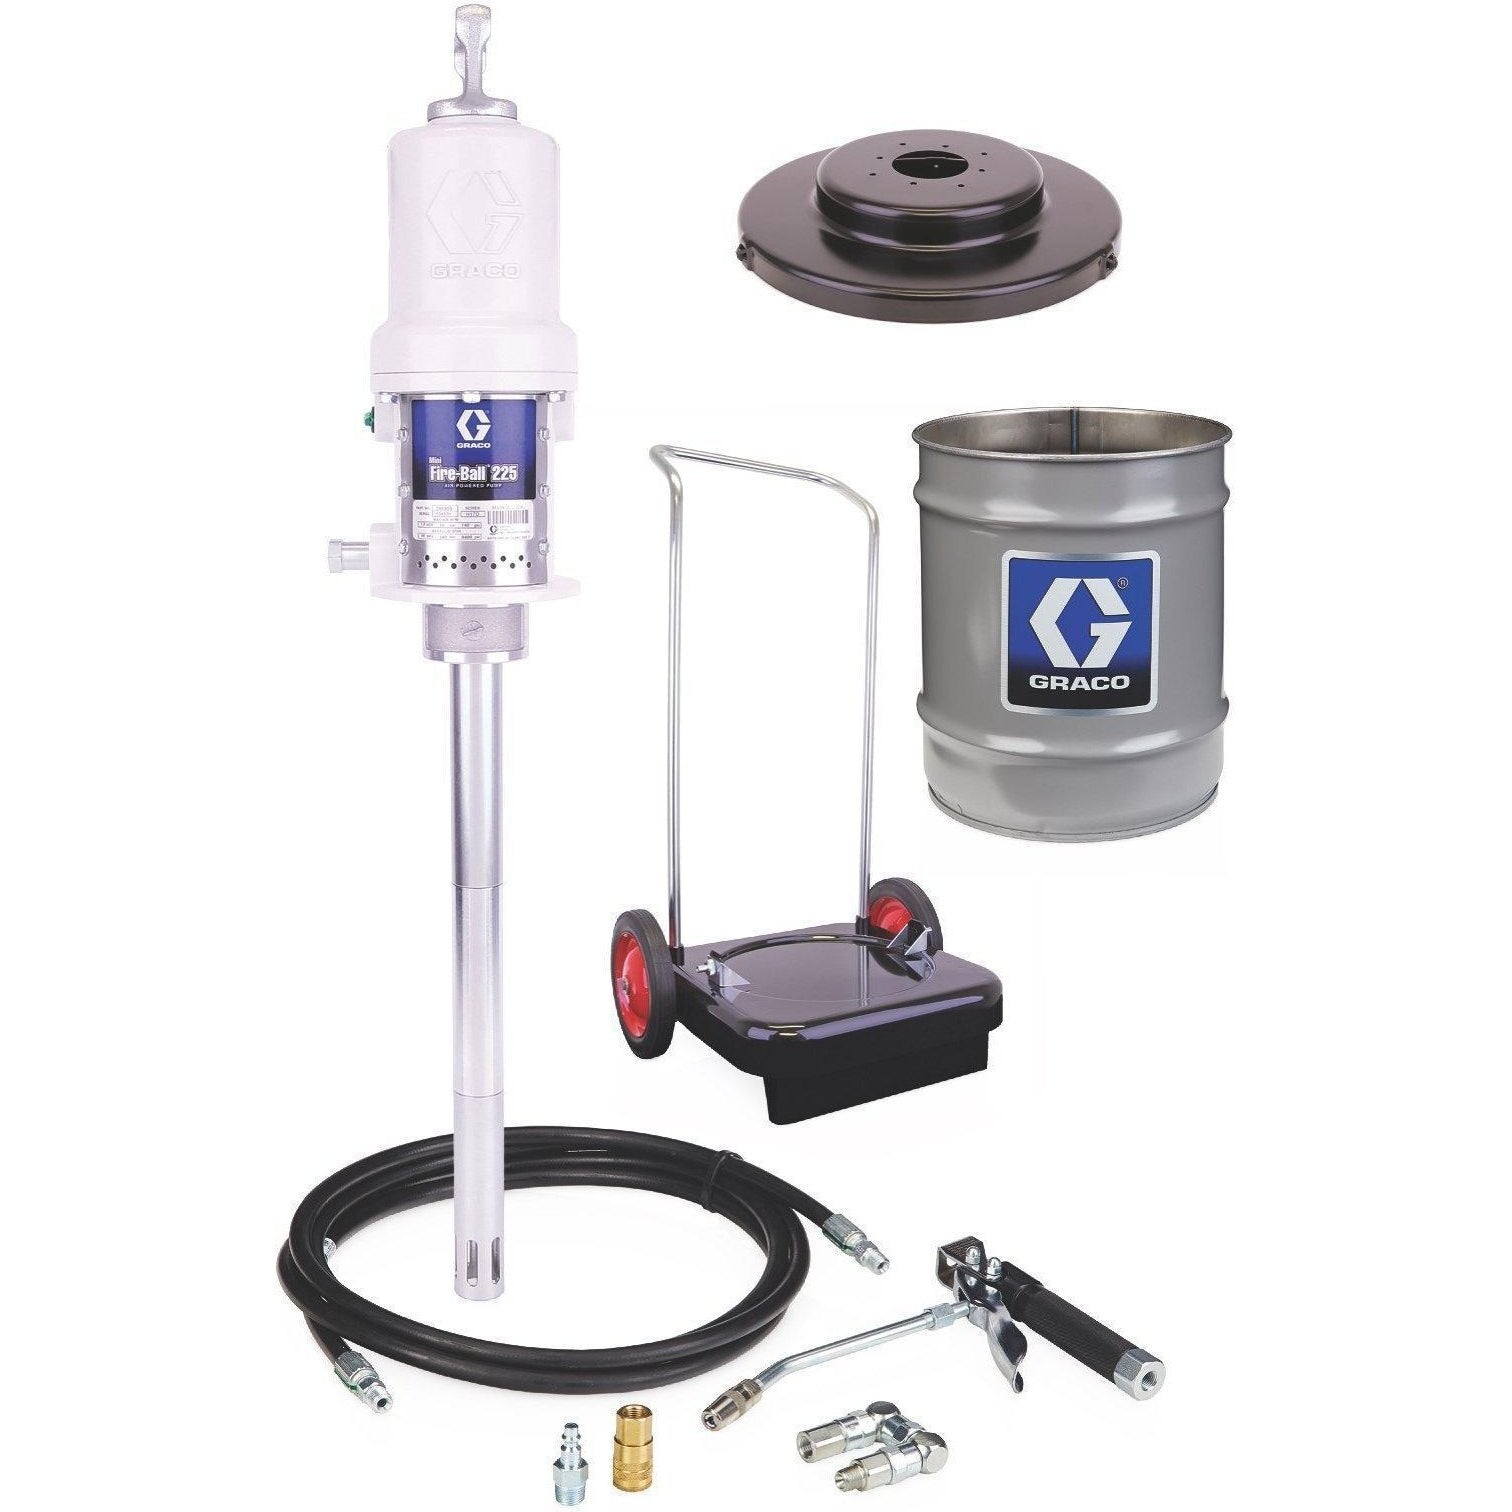 253385-Graco 253385 Mini Fire-Ball 225 50:1 35 Lb. Grease Pump With Dispense Kit, Handle, Pail, And Ce Kit-Order-Online-Fireball-Equipment